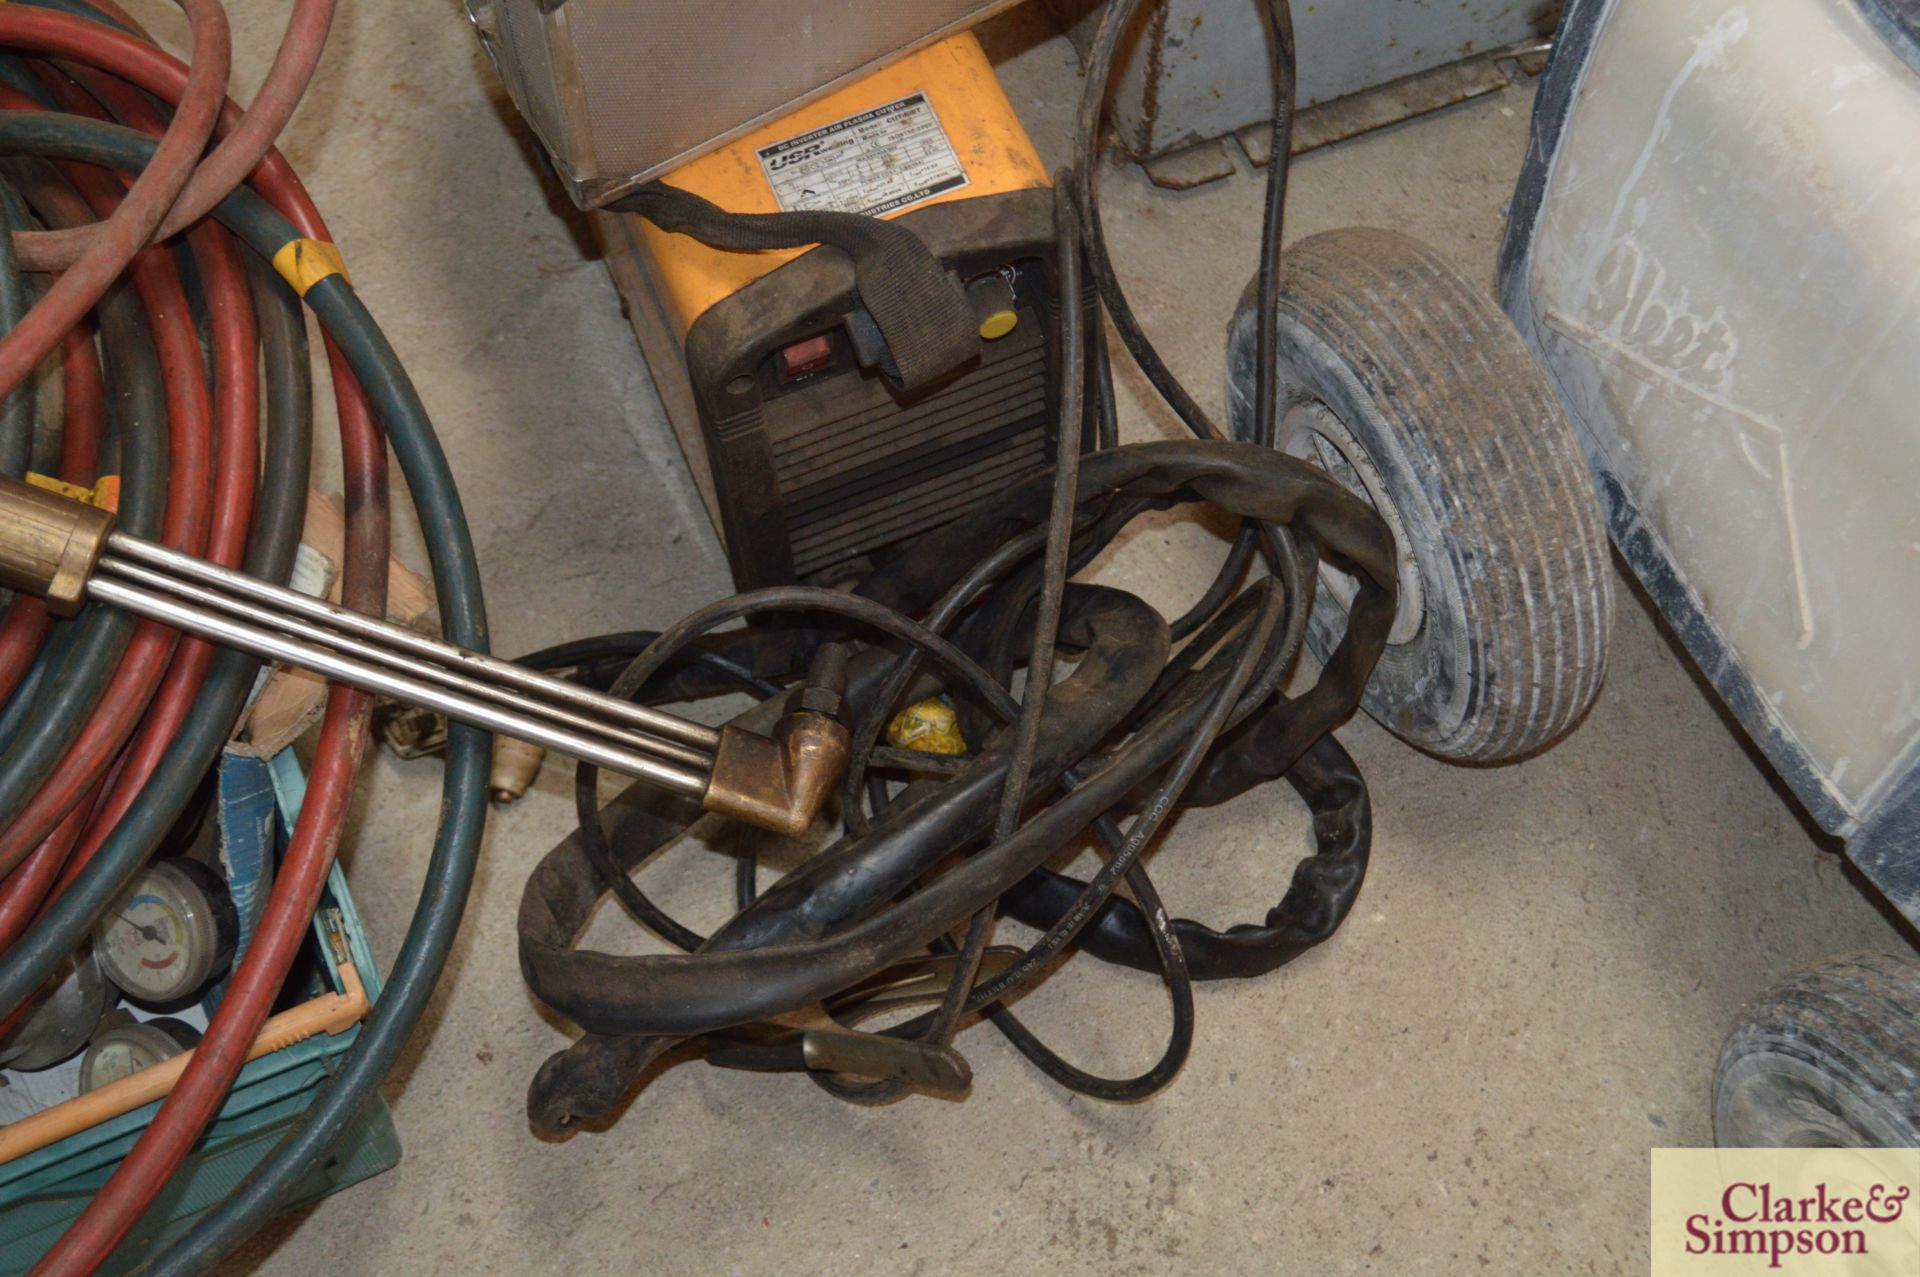 USR 40ET plasma cutter with accessories. - Image 2 of 2